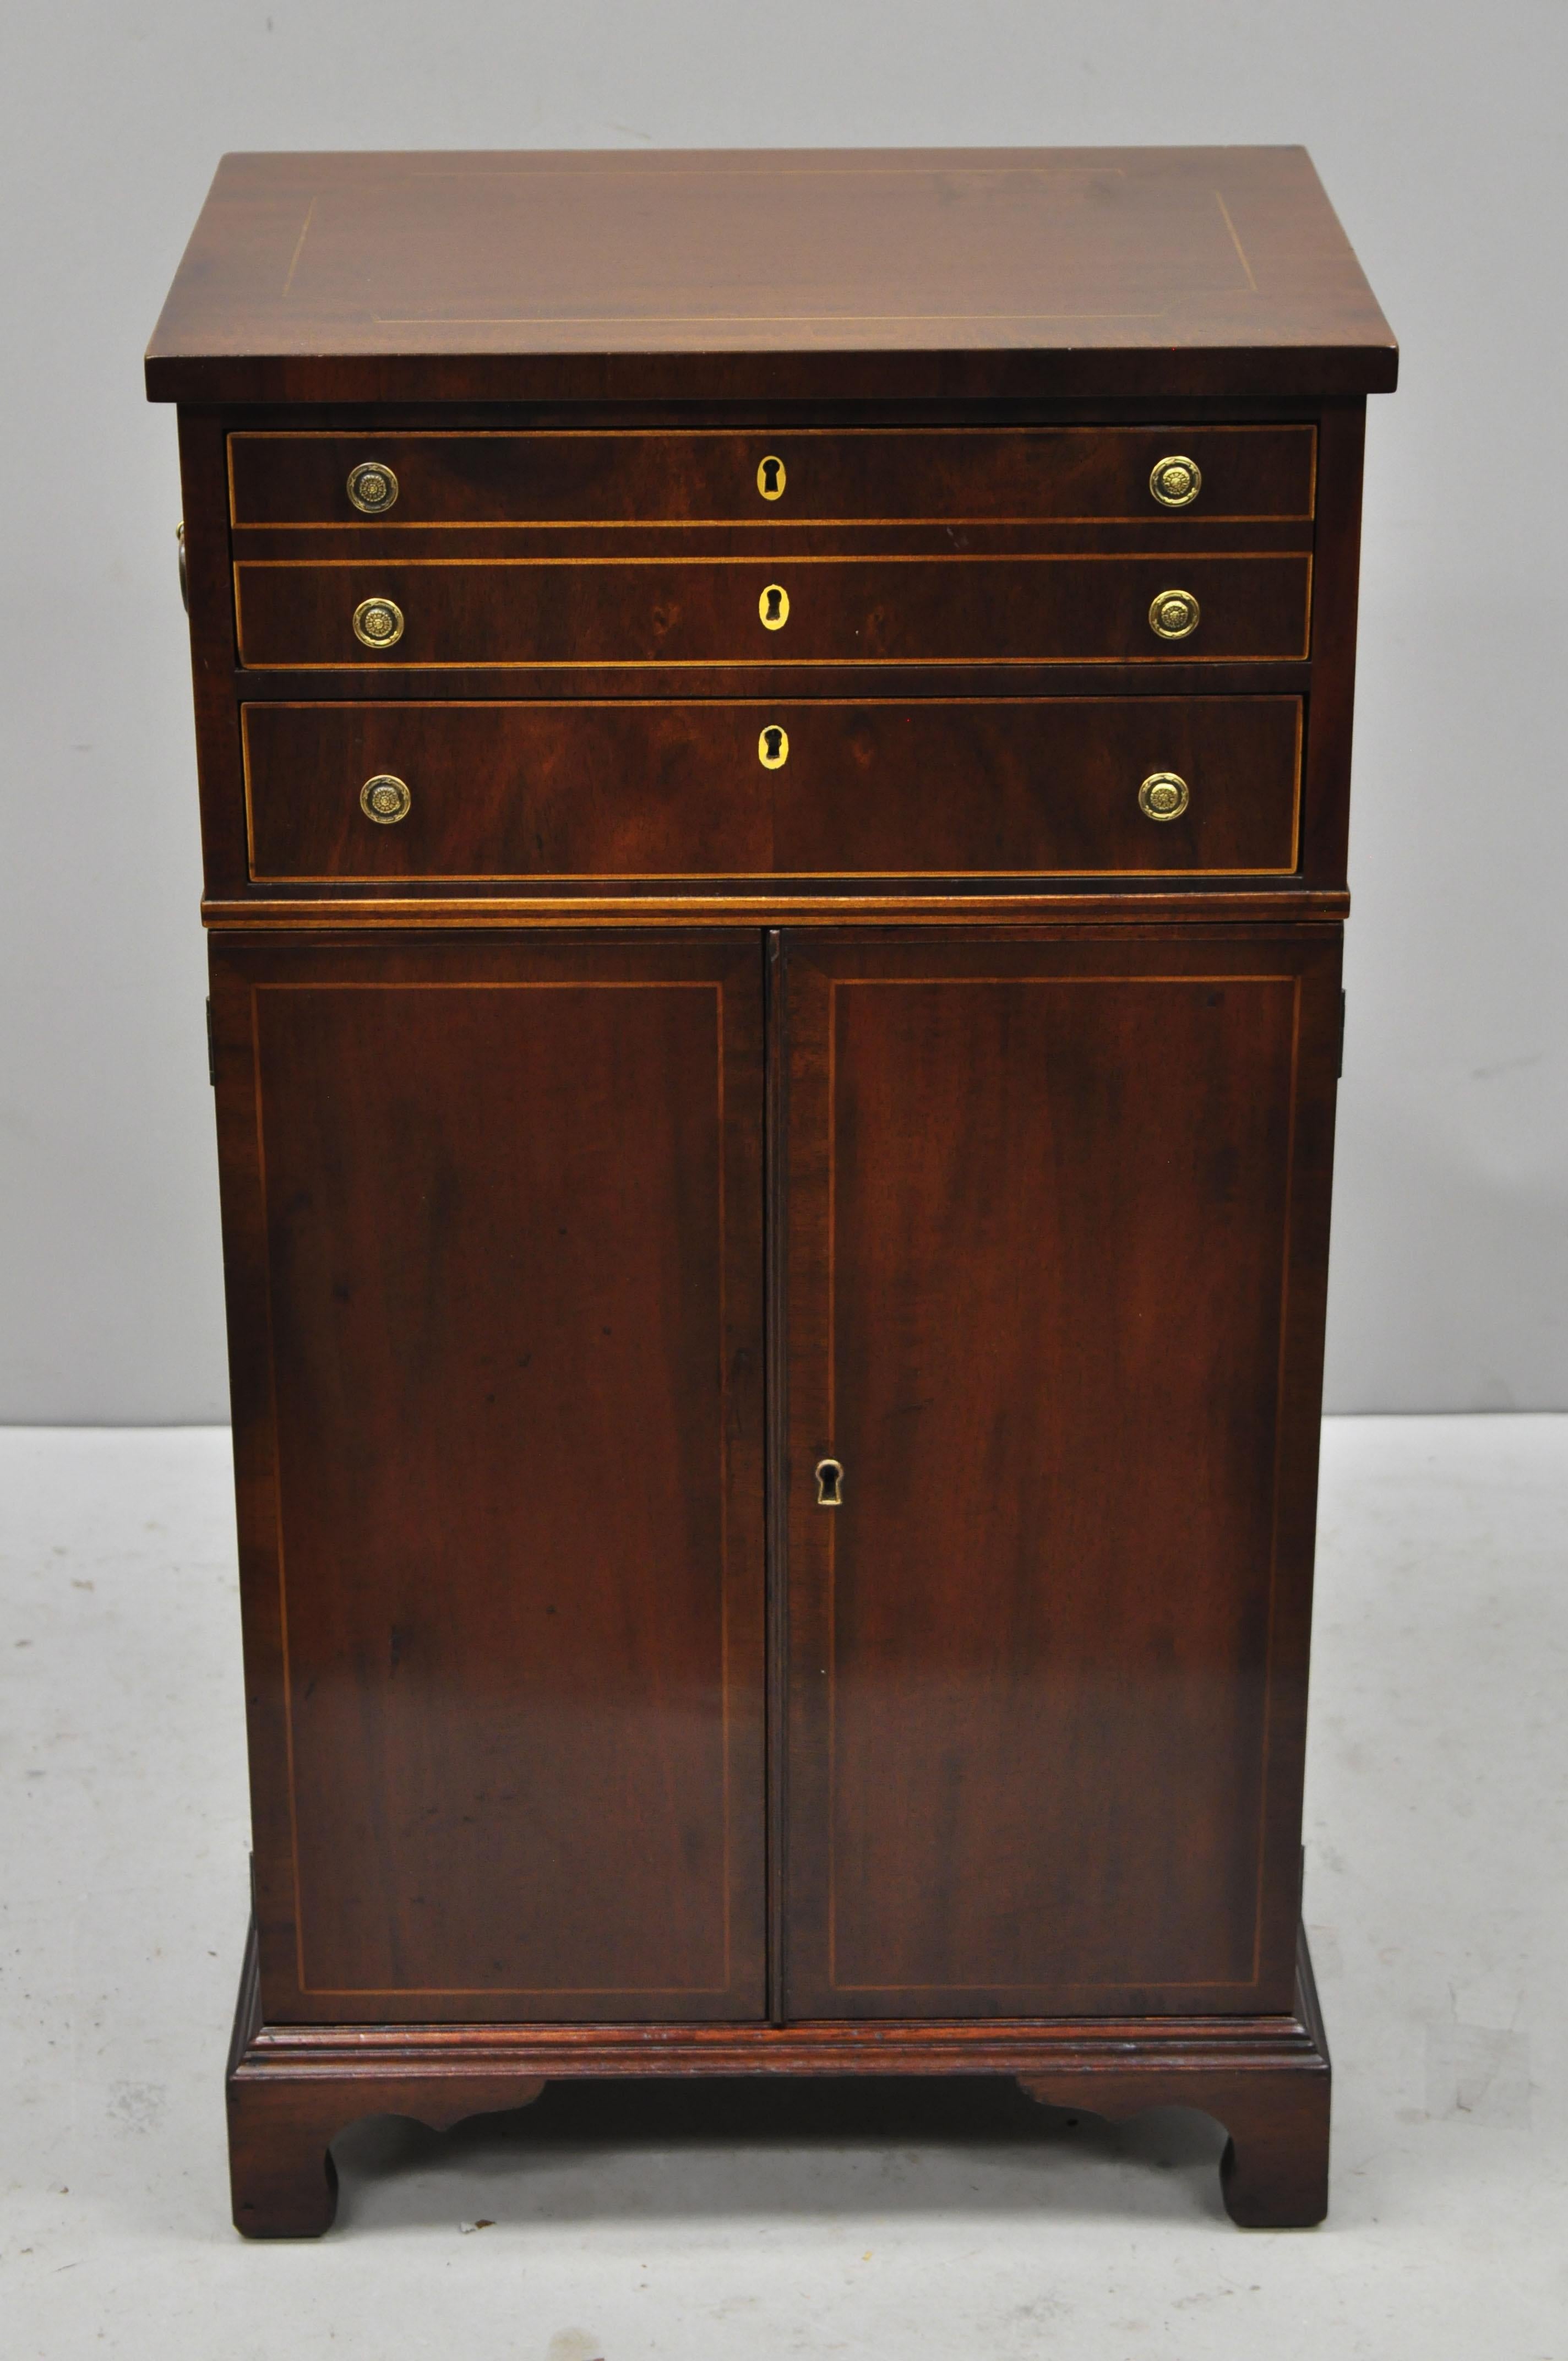 Antique Johnson Handley American Museum Collection Sheraton Mahogany Small Cabinet. Item features satinwood inlays, solid wood construction, beautiful wood grain, 2 swing doors, working lock and key, 2 dovetailed drawers, solid brass hardware, very